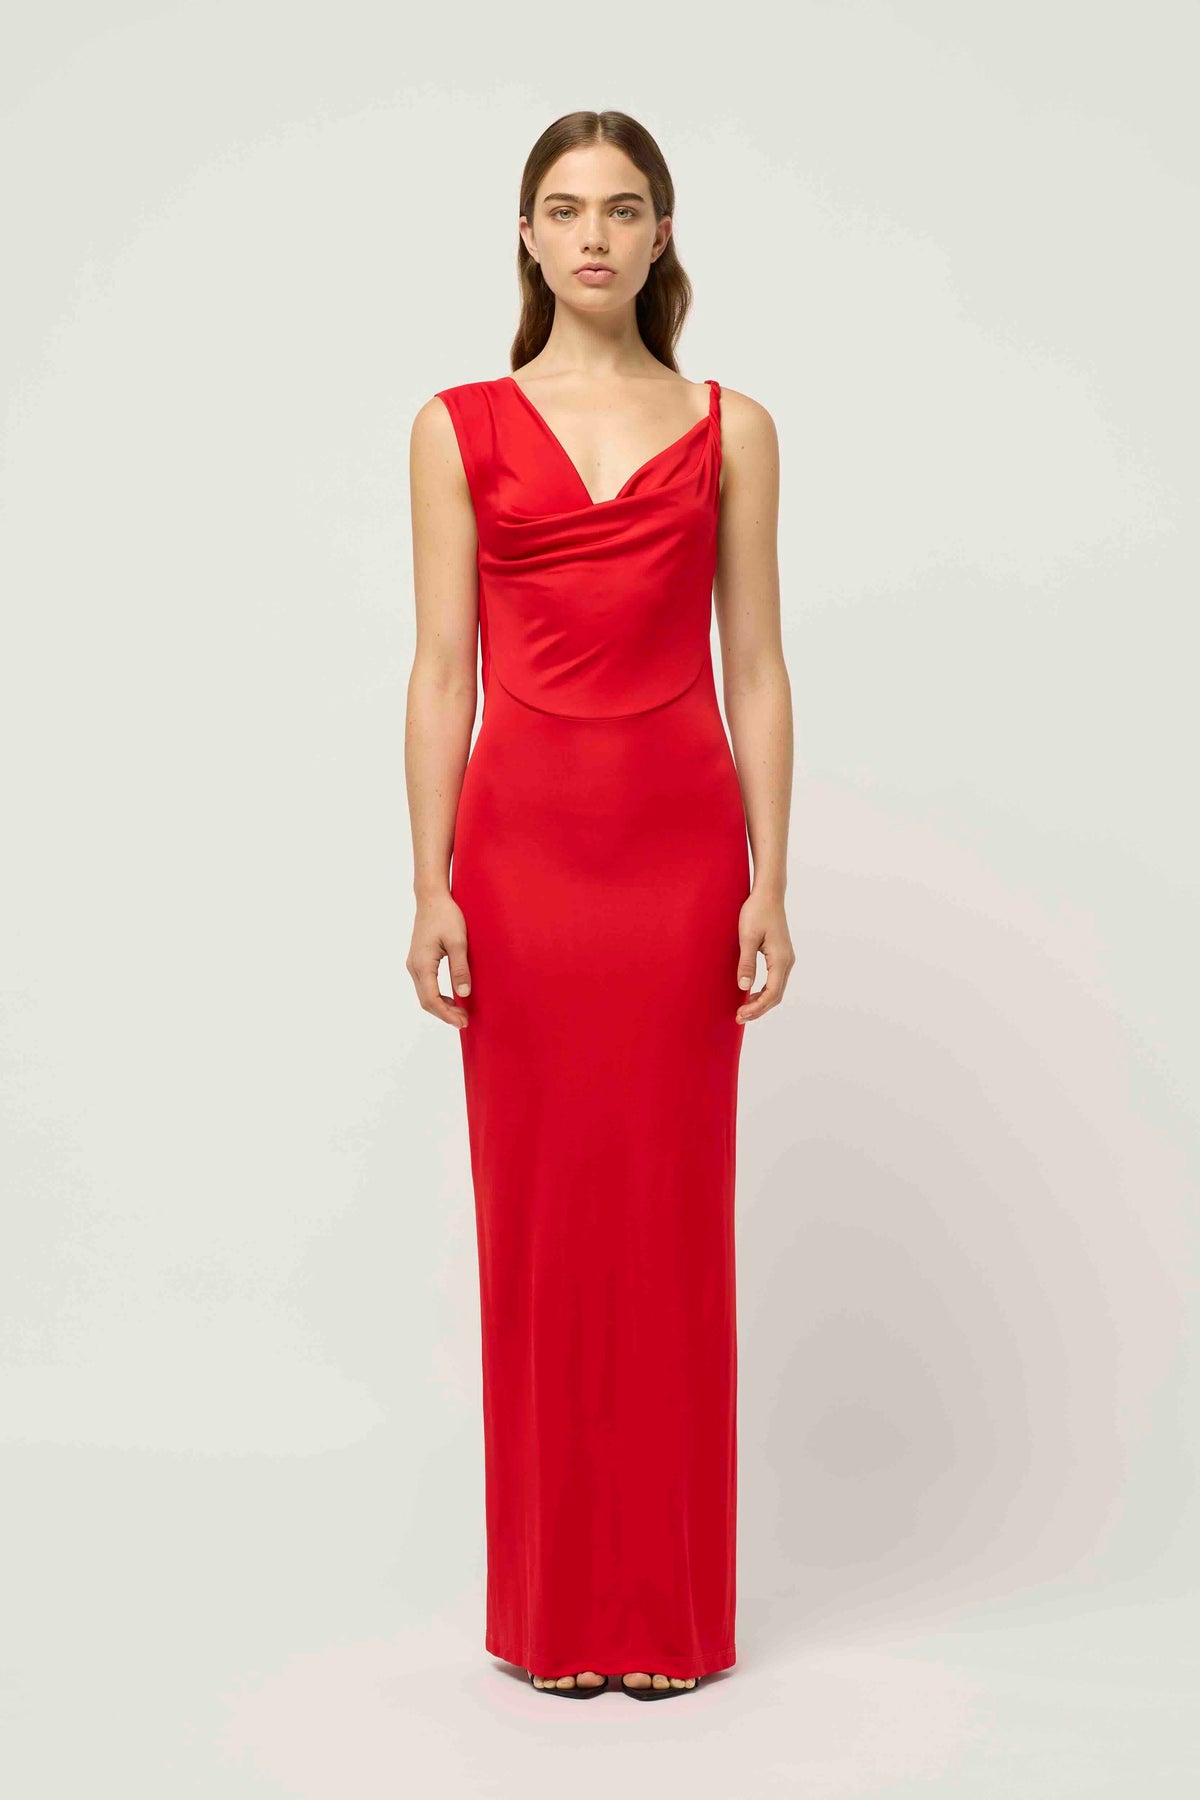 TWISTED WOMANS  DRAPED DRESS - RED